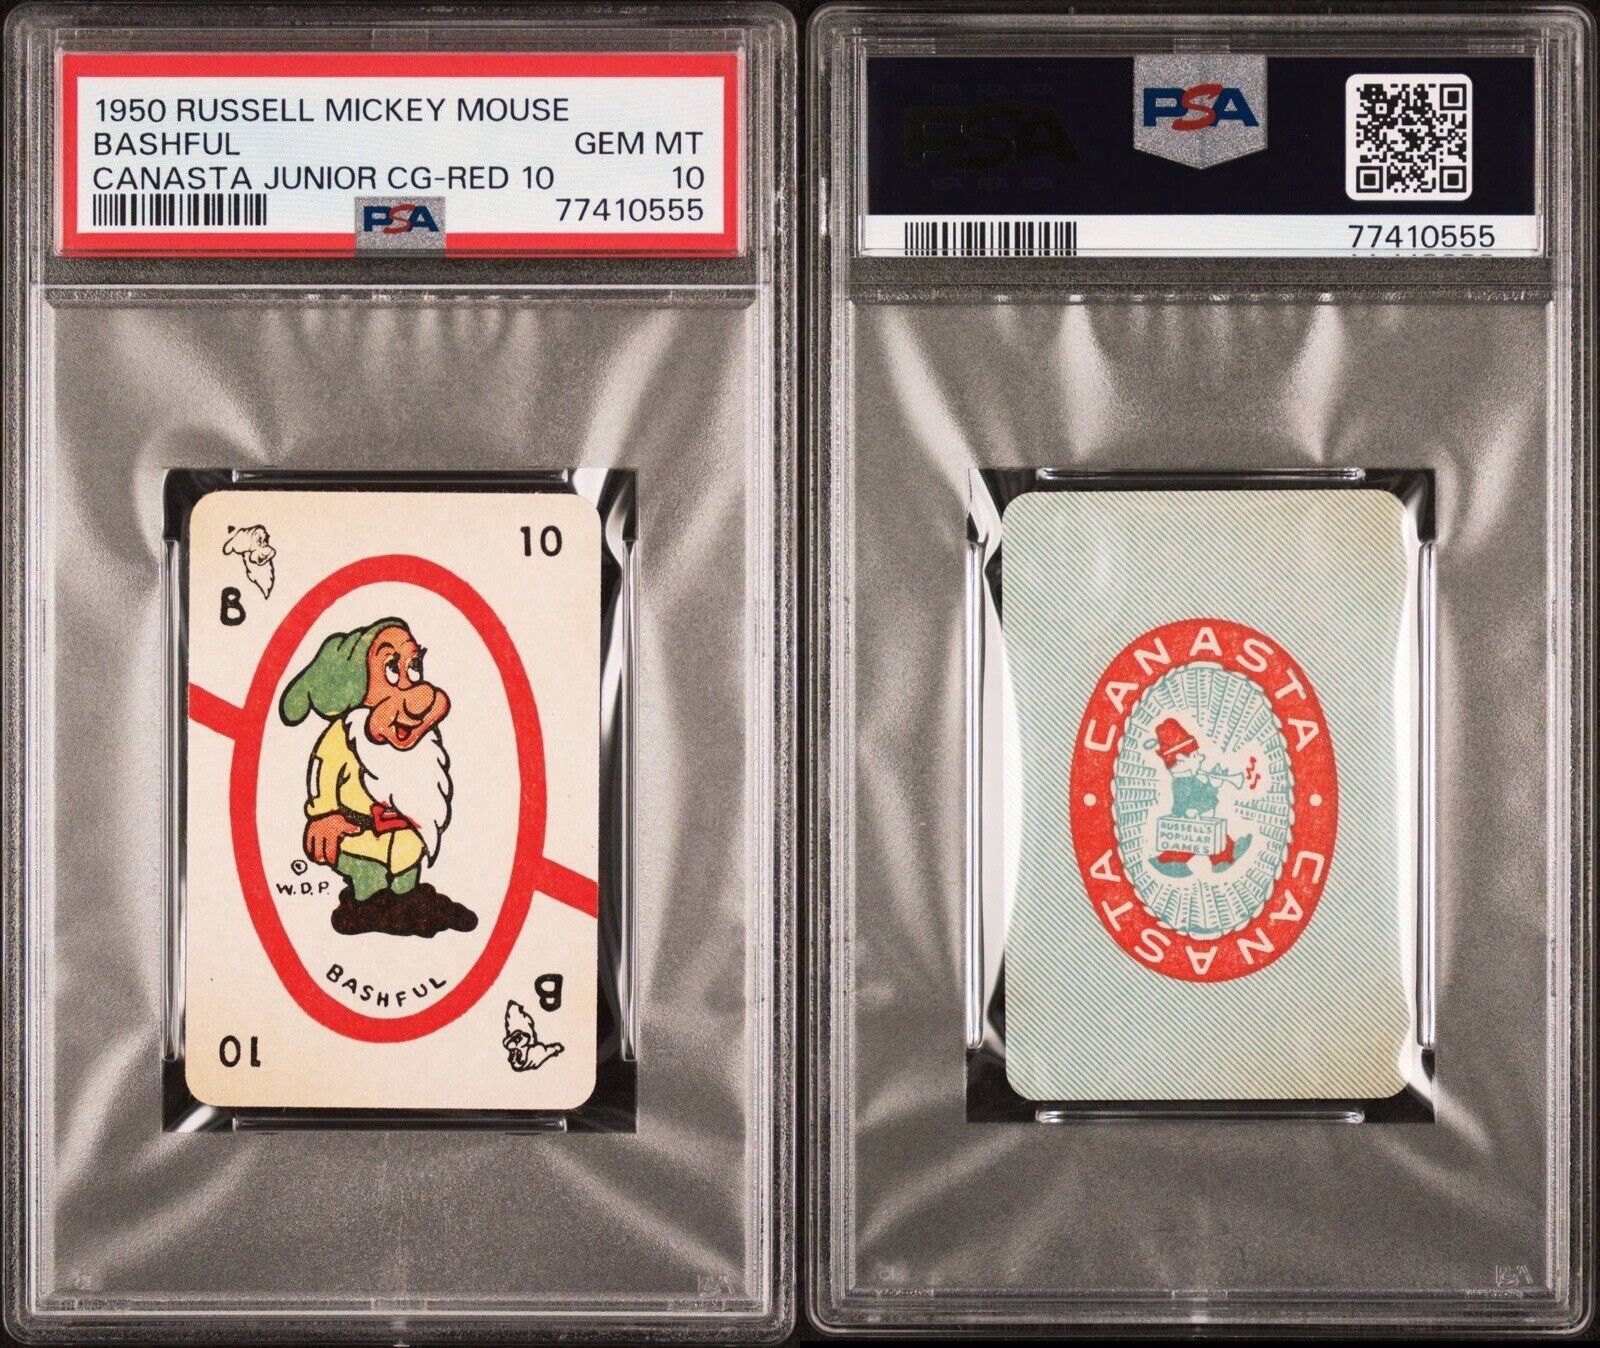 VINTAGE 1950 RUSSELL MICKEY MOUSE BASHFUL CANASTA CG-RED 10 PSA 10 GEM MINT